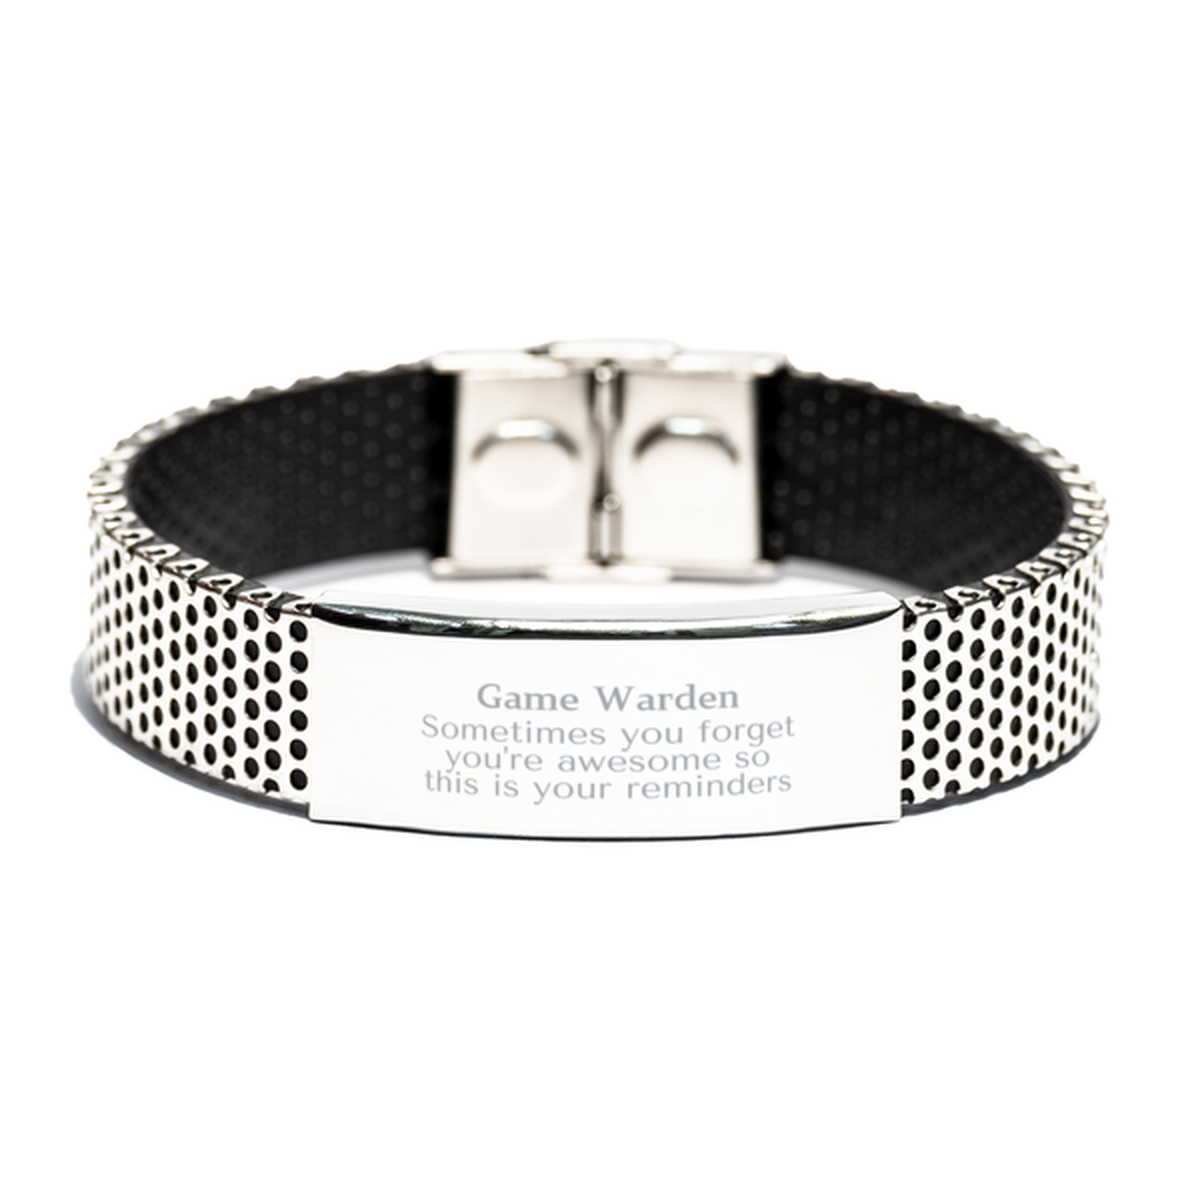 Sentimental Game Warden Stainless Steel Bracelet, Game Warden Sometimes you forget you're awesome so this is your reminders, Graduation Christmas Birthday Gifts for Game Warden, Men, Women, Coworkers